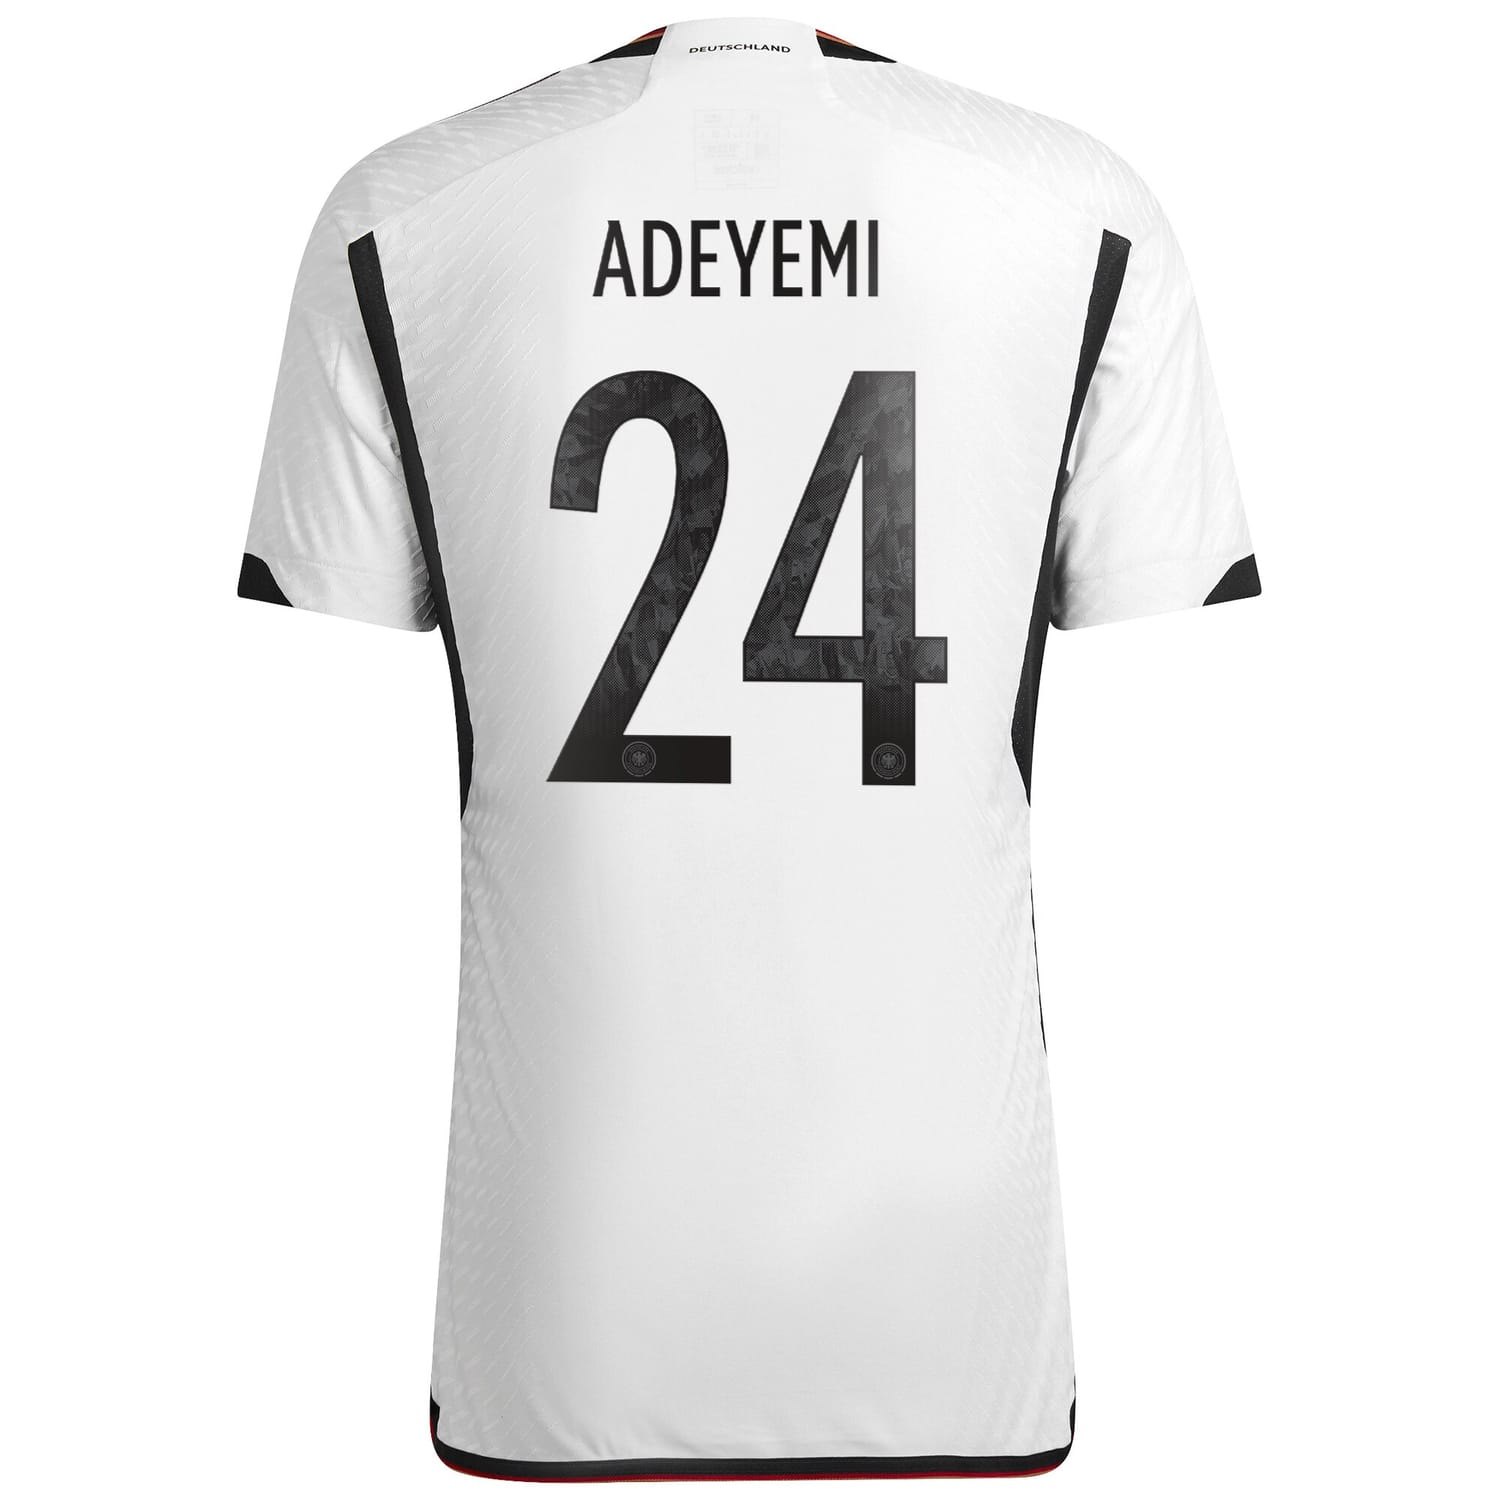 Germany National Team Home Authentic Jersey Shirt 2022 player Karim Adeyemi 24 printing for Men